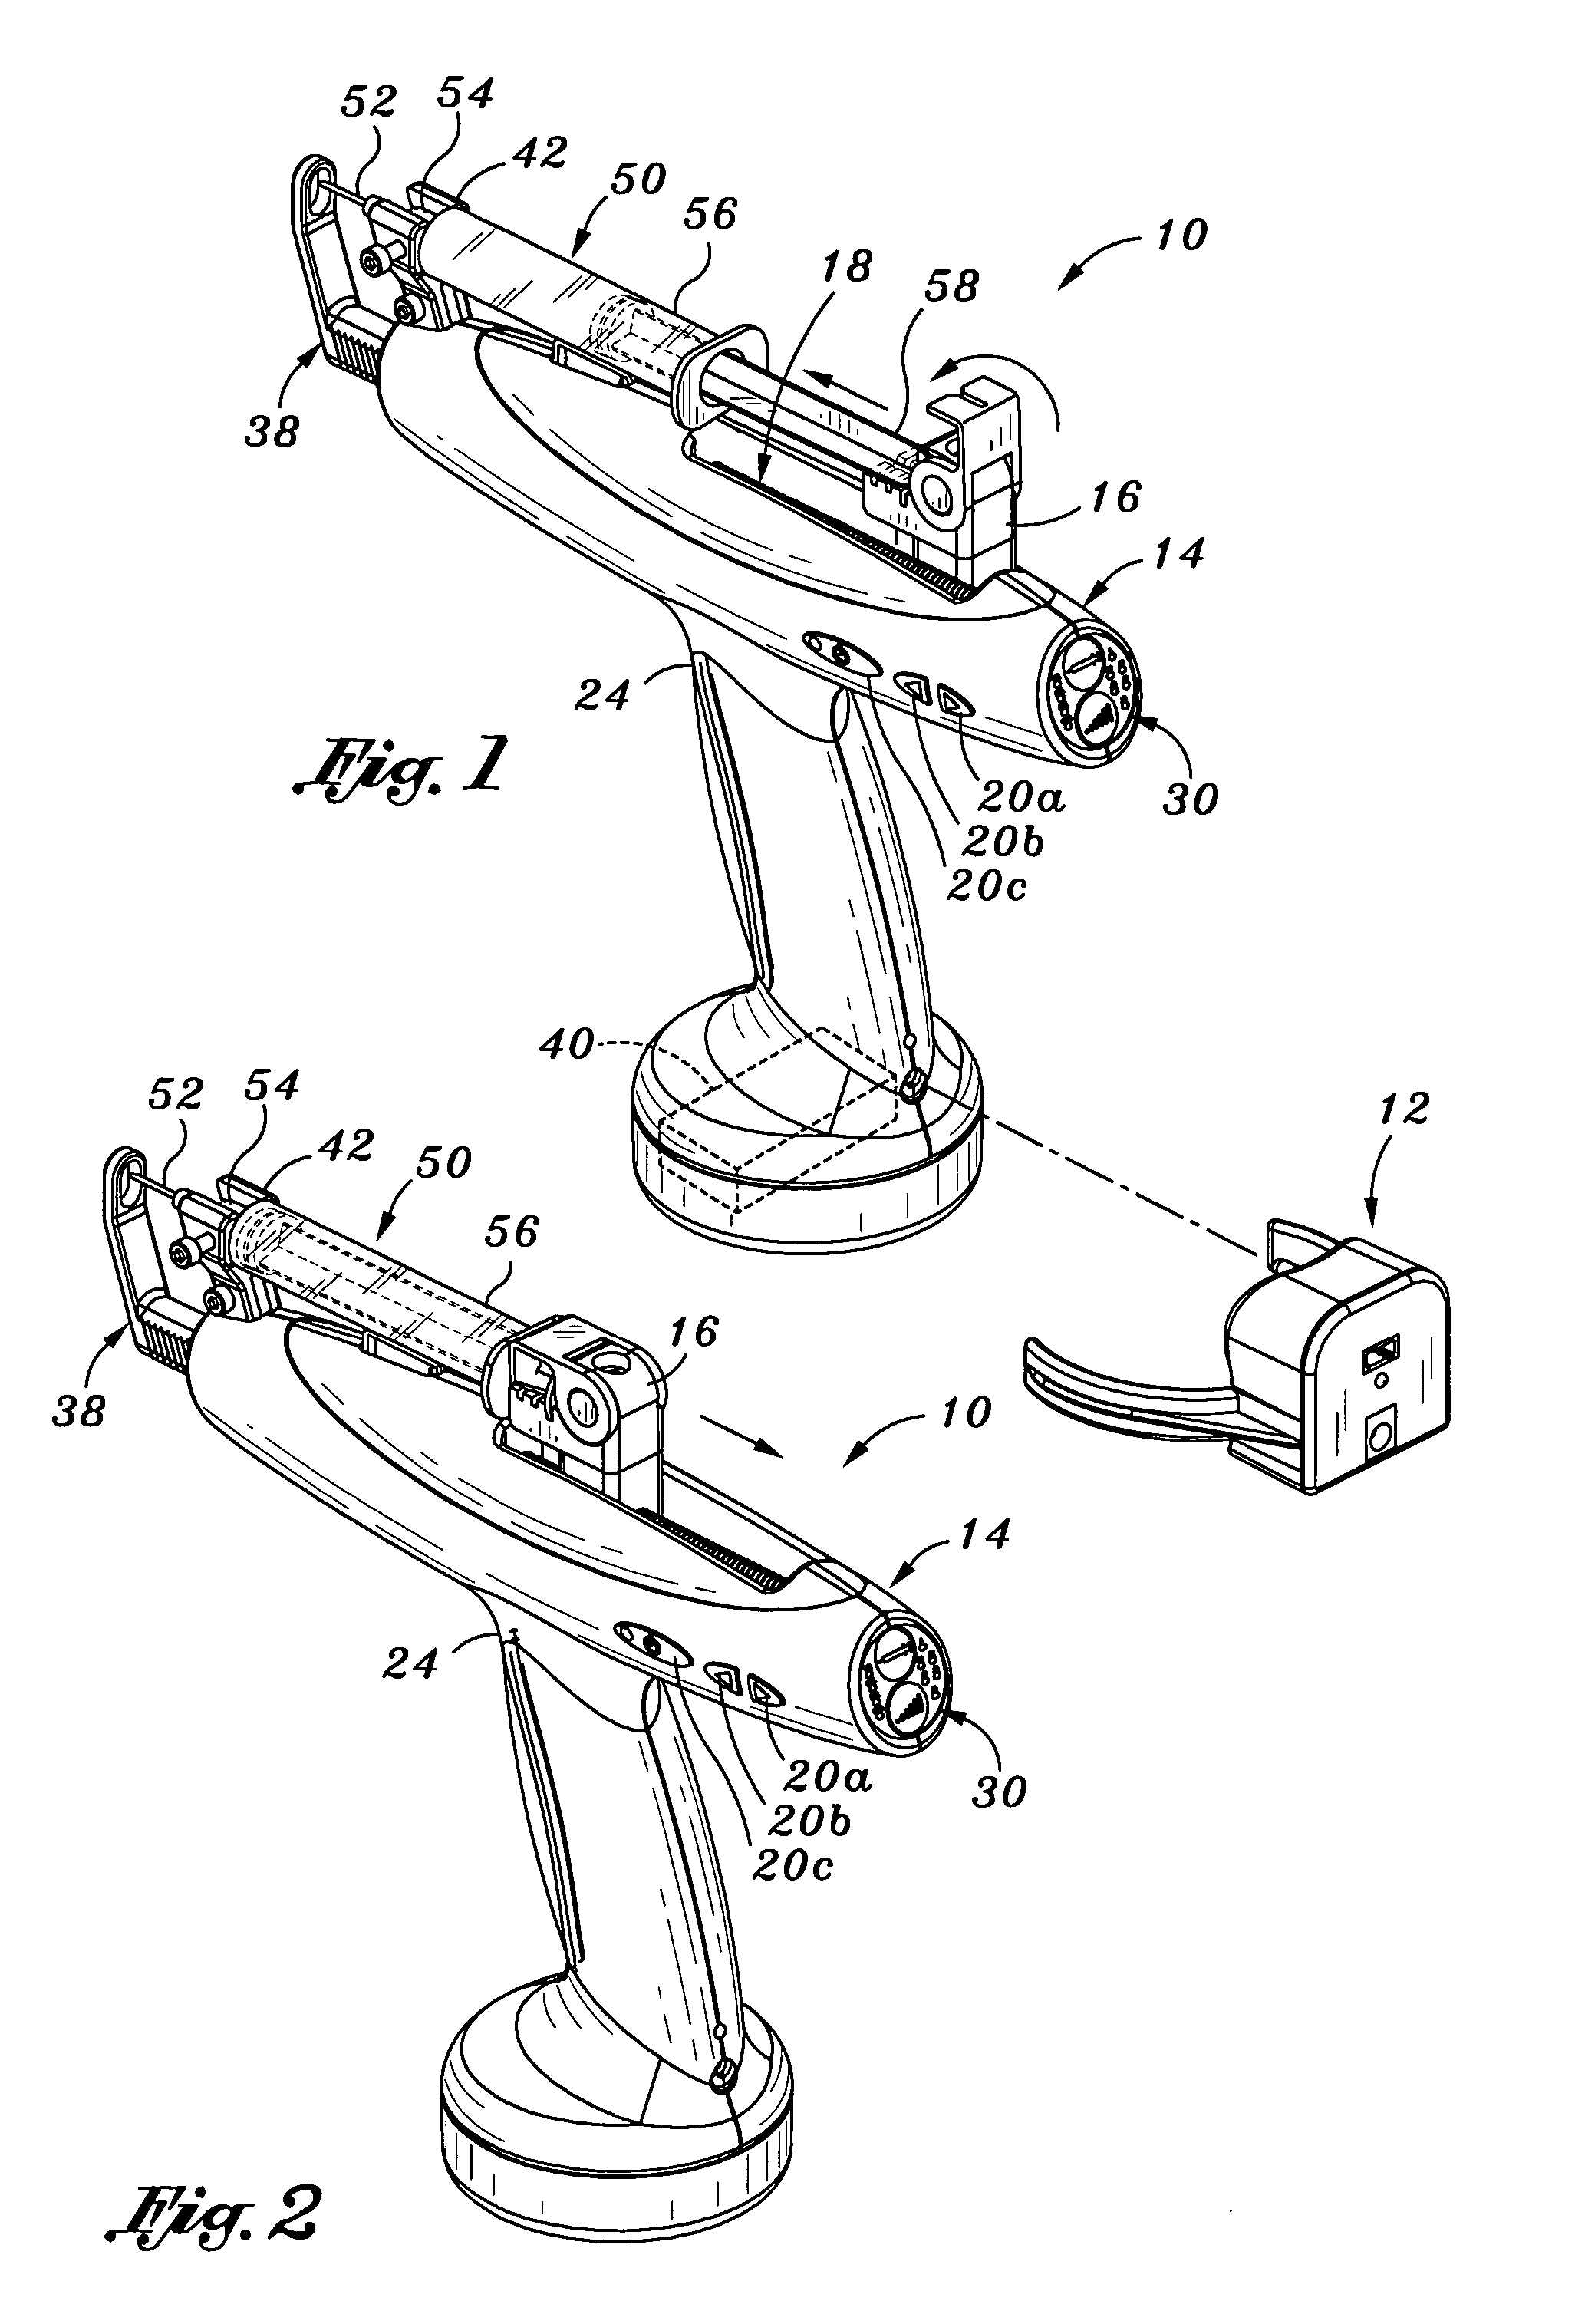 Rechargeable handheld injection device with reversible drive having adjustable syringe cradle